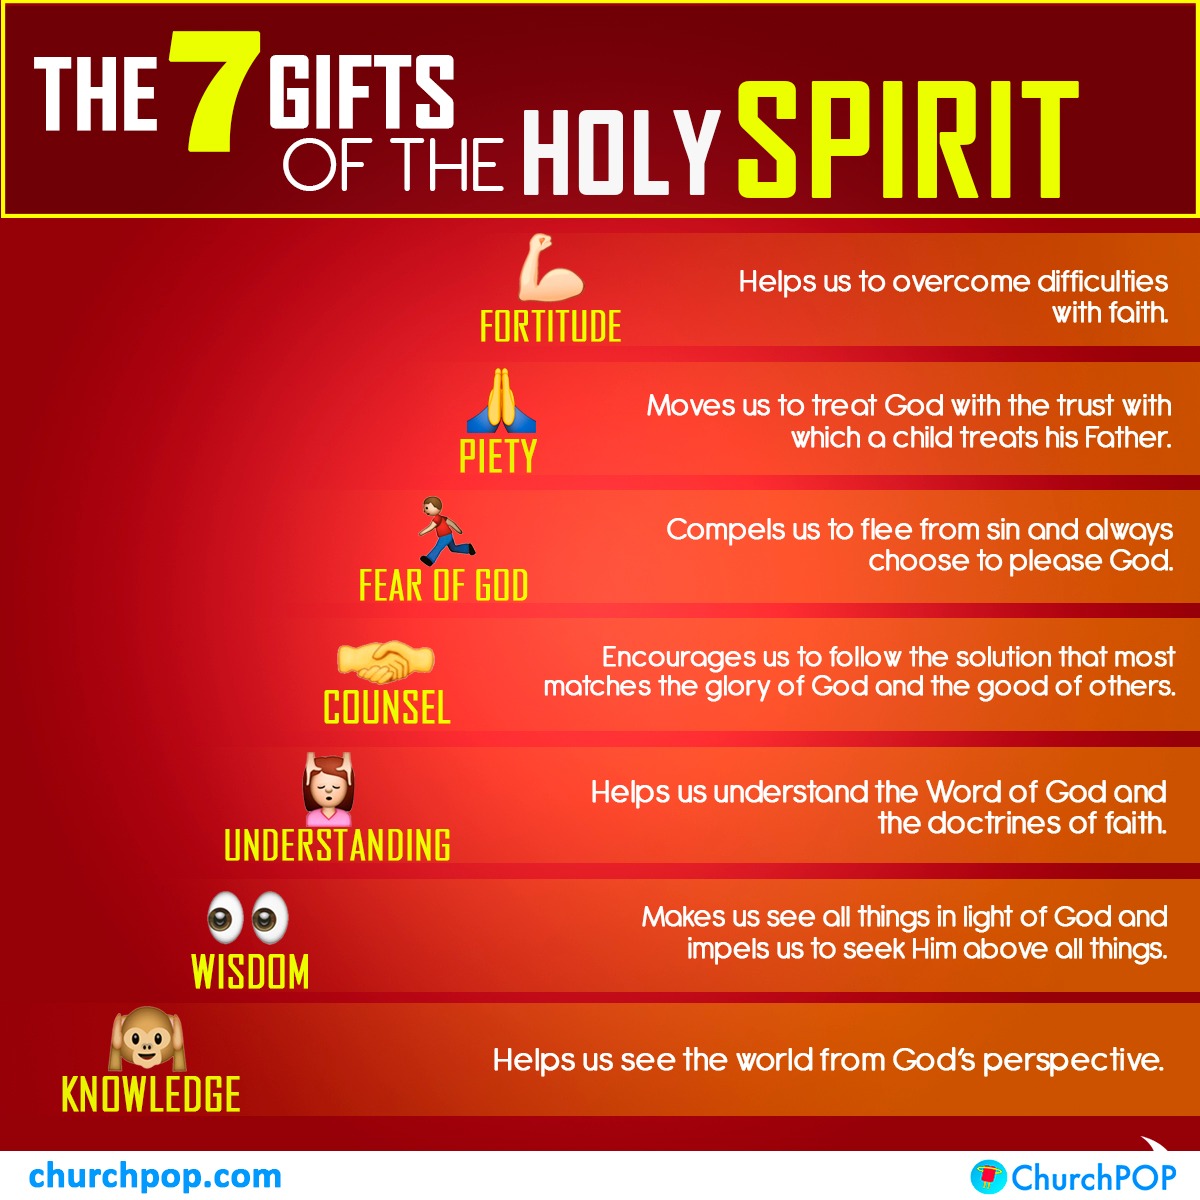 the-7-gifts-of-the-holy-spirit-every-catholic-needs-to-know-in-one-infographic